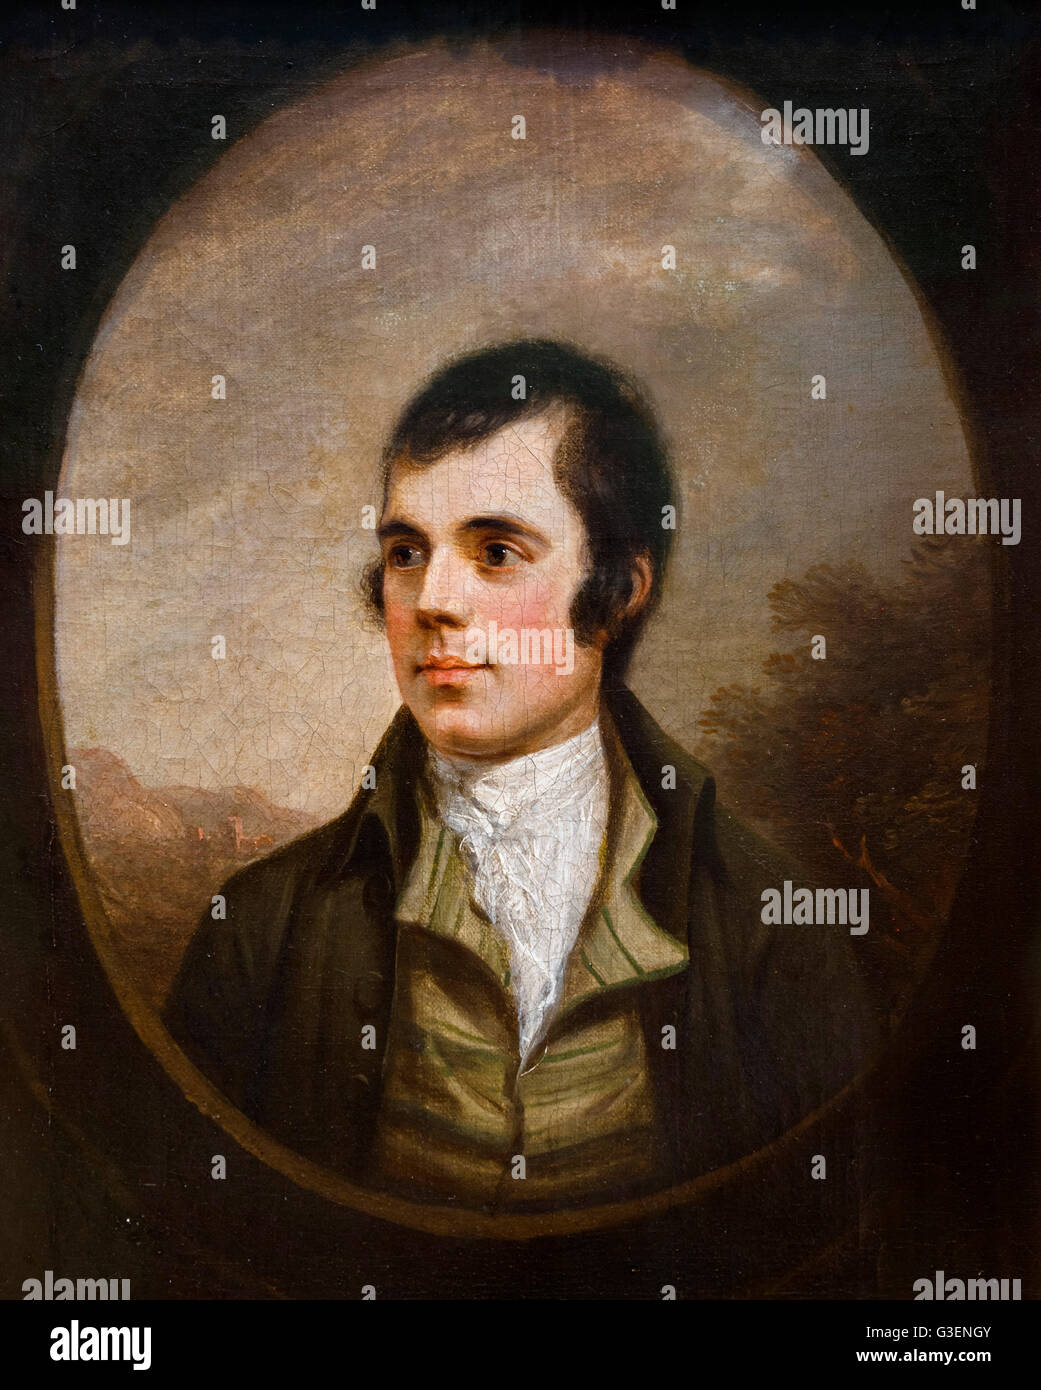 The 18thC Scottish poet, Robert Burns (1759-1796), also known as Rabbie Burns, was a Scottish poet and lyricist, widely regarded as the national poet of Scotland. Portrait by Alexander Nasmyth, oil on canvas, 1787. Stock Photo